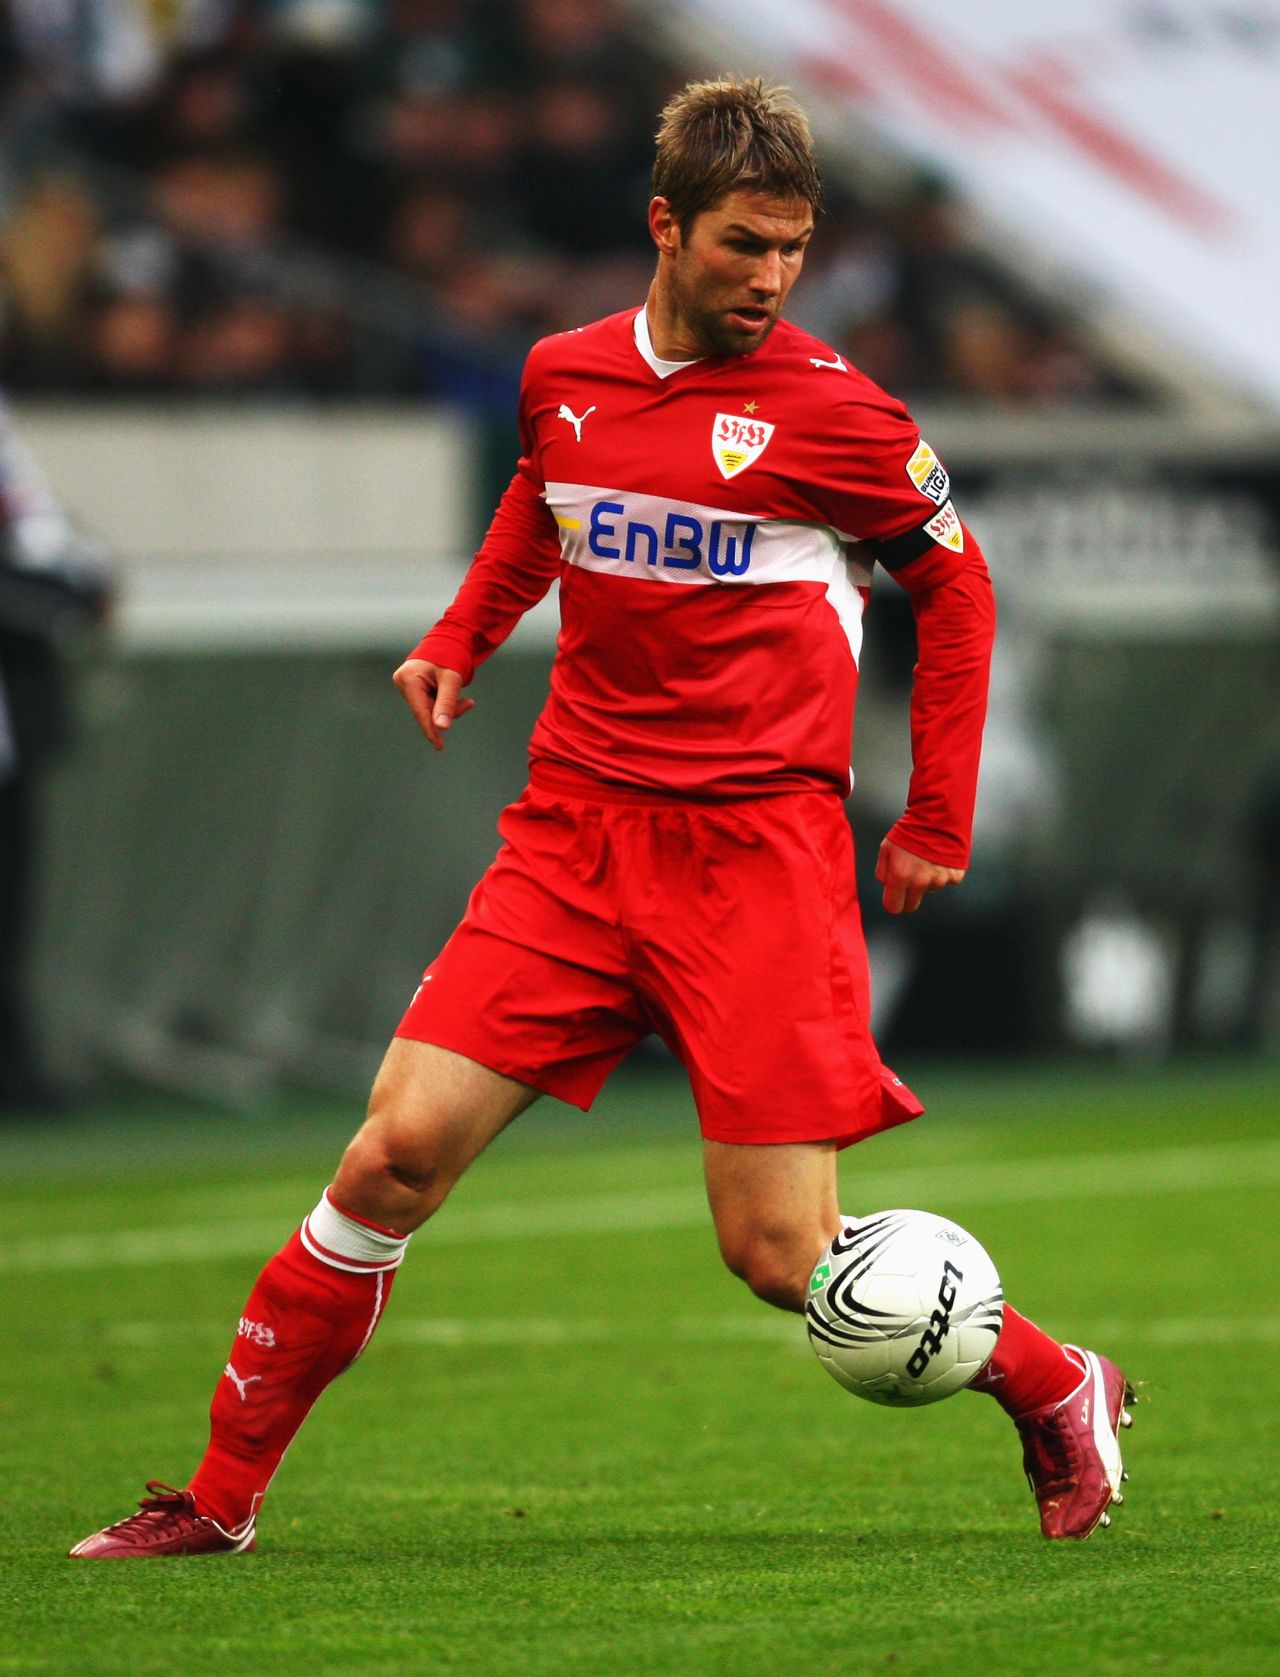 The midfielder returned to Germany in August 2005 when he moved from Stuttgart to Villa. Hitzlsperger won the German Bundesliga title with Stuttgart in the 2006-2007 season.